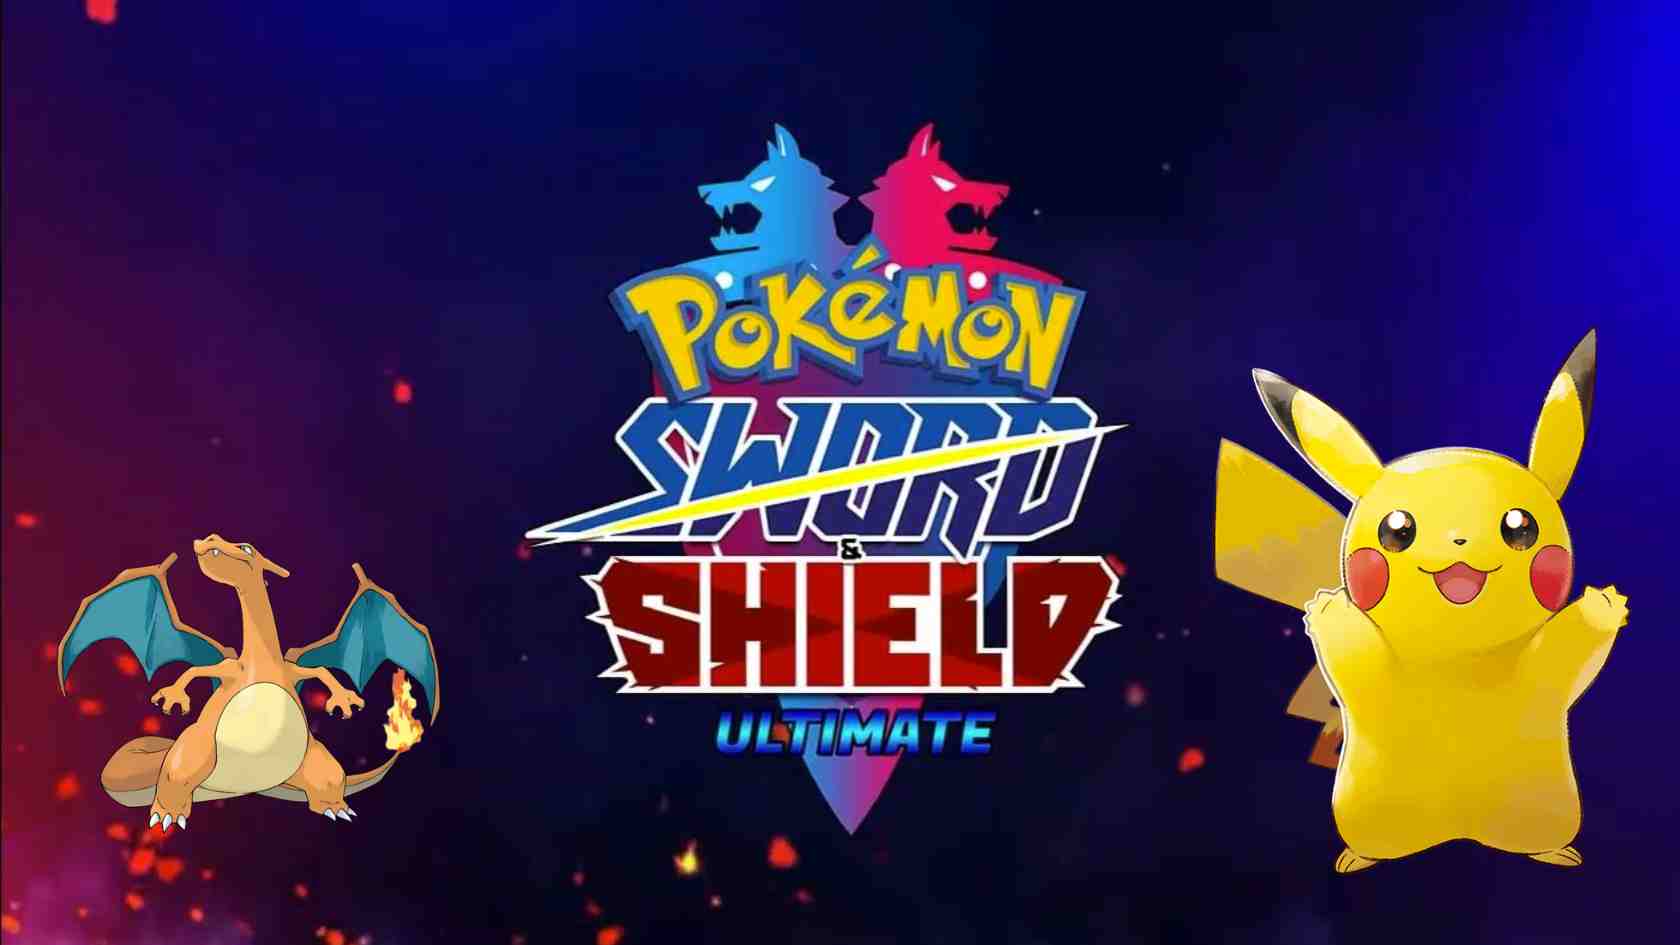 How To Download Pokémon Sword & Shield Game For Android, High Graphics